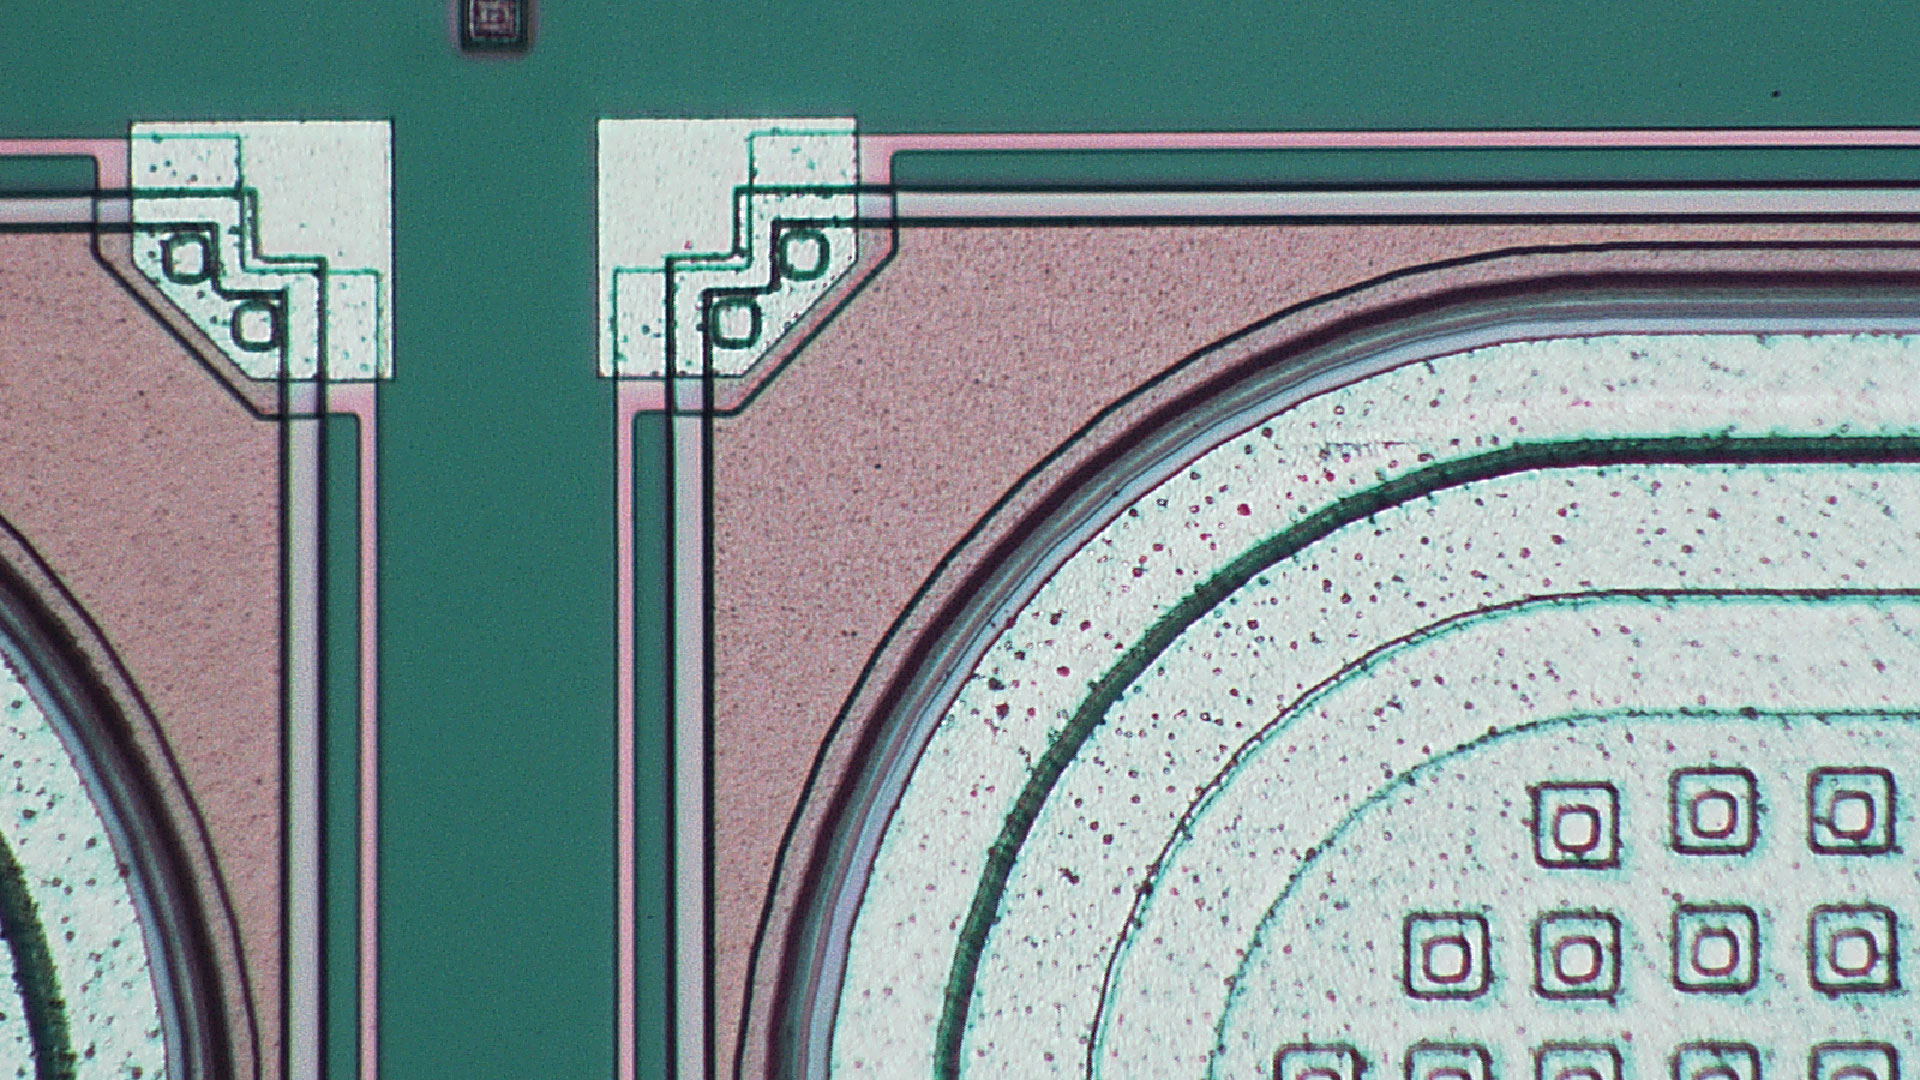 [Translate to German:] To better see fine details and defects, a semiconductor material can be inspected using a microscope with various types of lighting. This image was taken with coaxial illumination. 